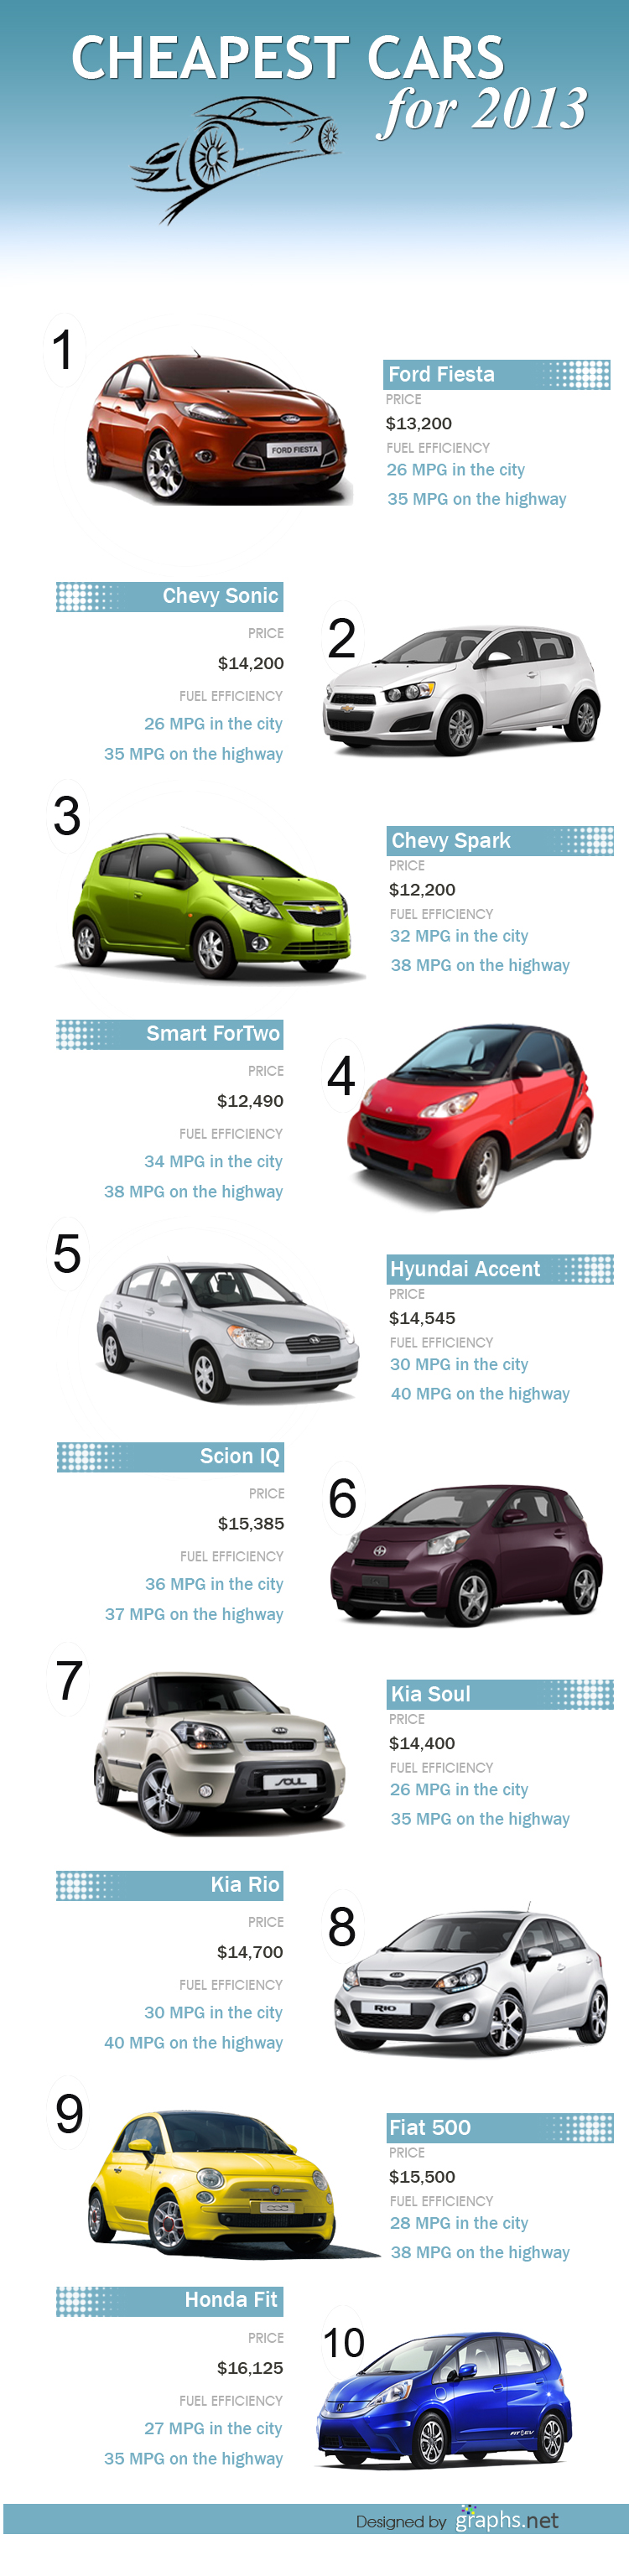 Top 10 Cheapest Cars for 2013